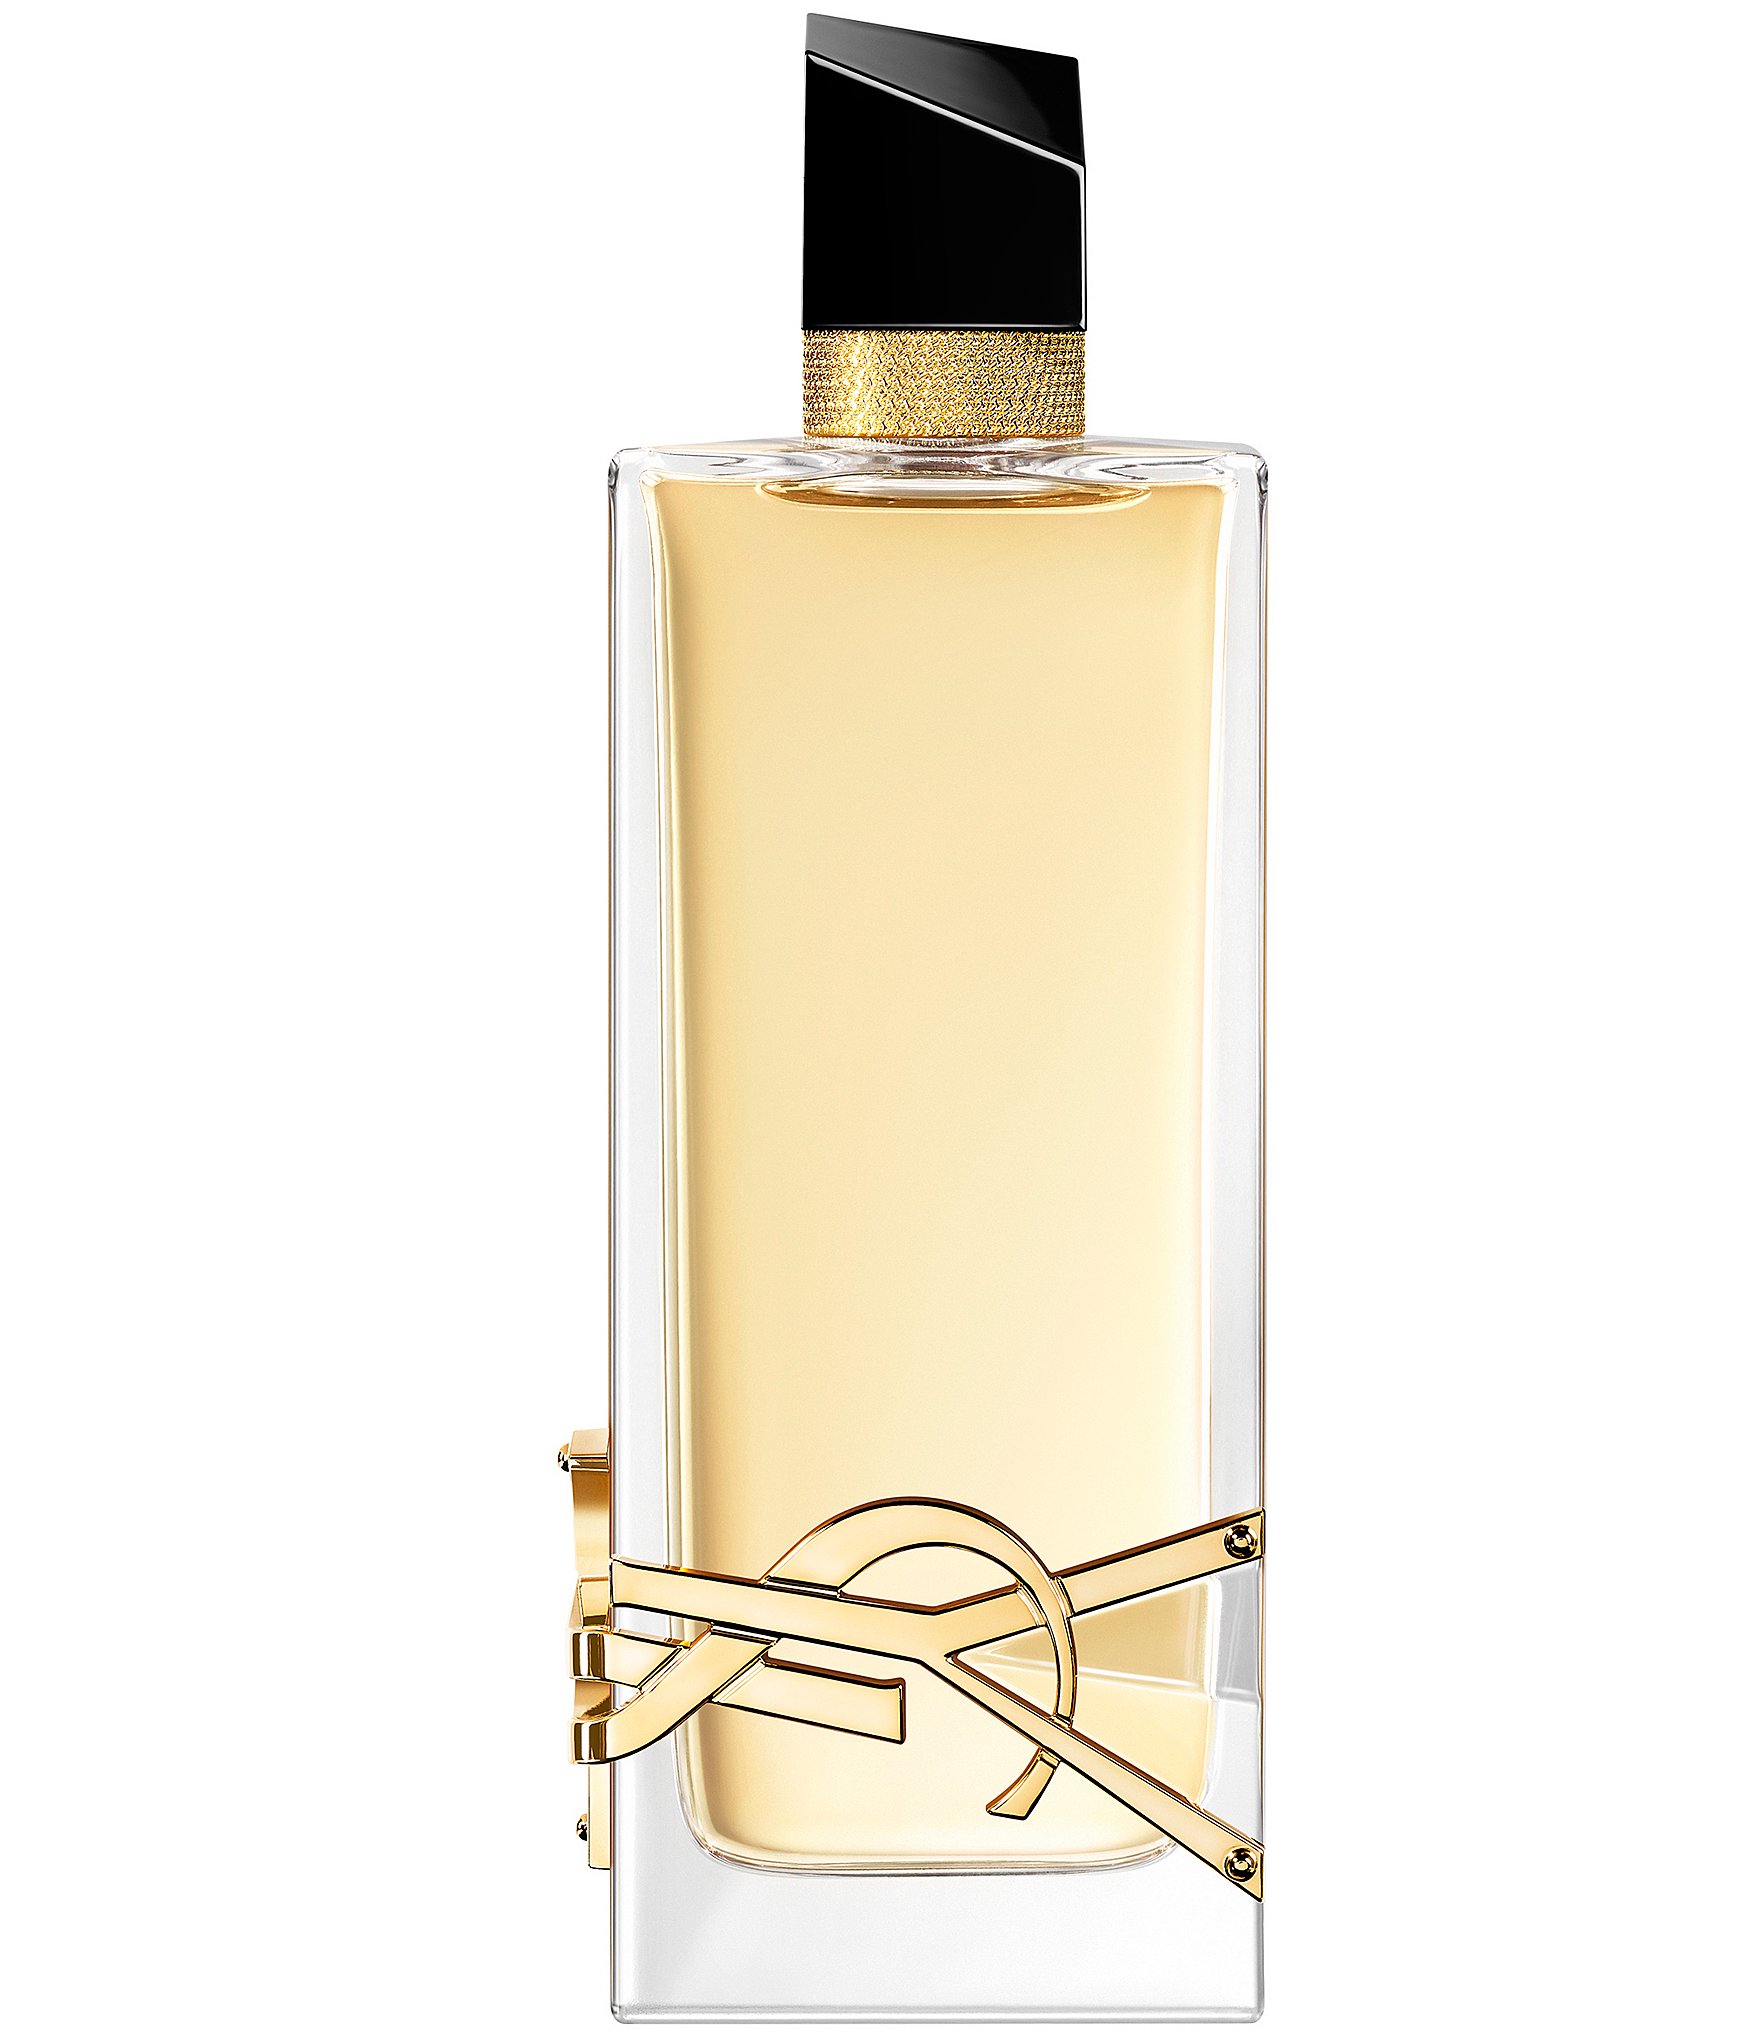 YSL LIBRE ignites a new 'Fiery, Floral' Intense edition - Duty